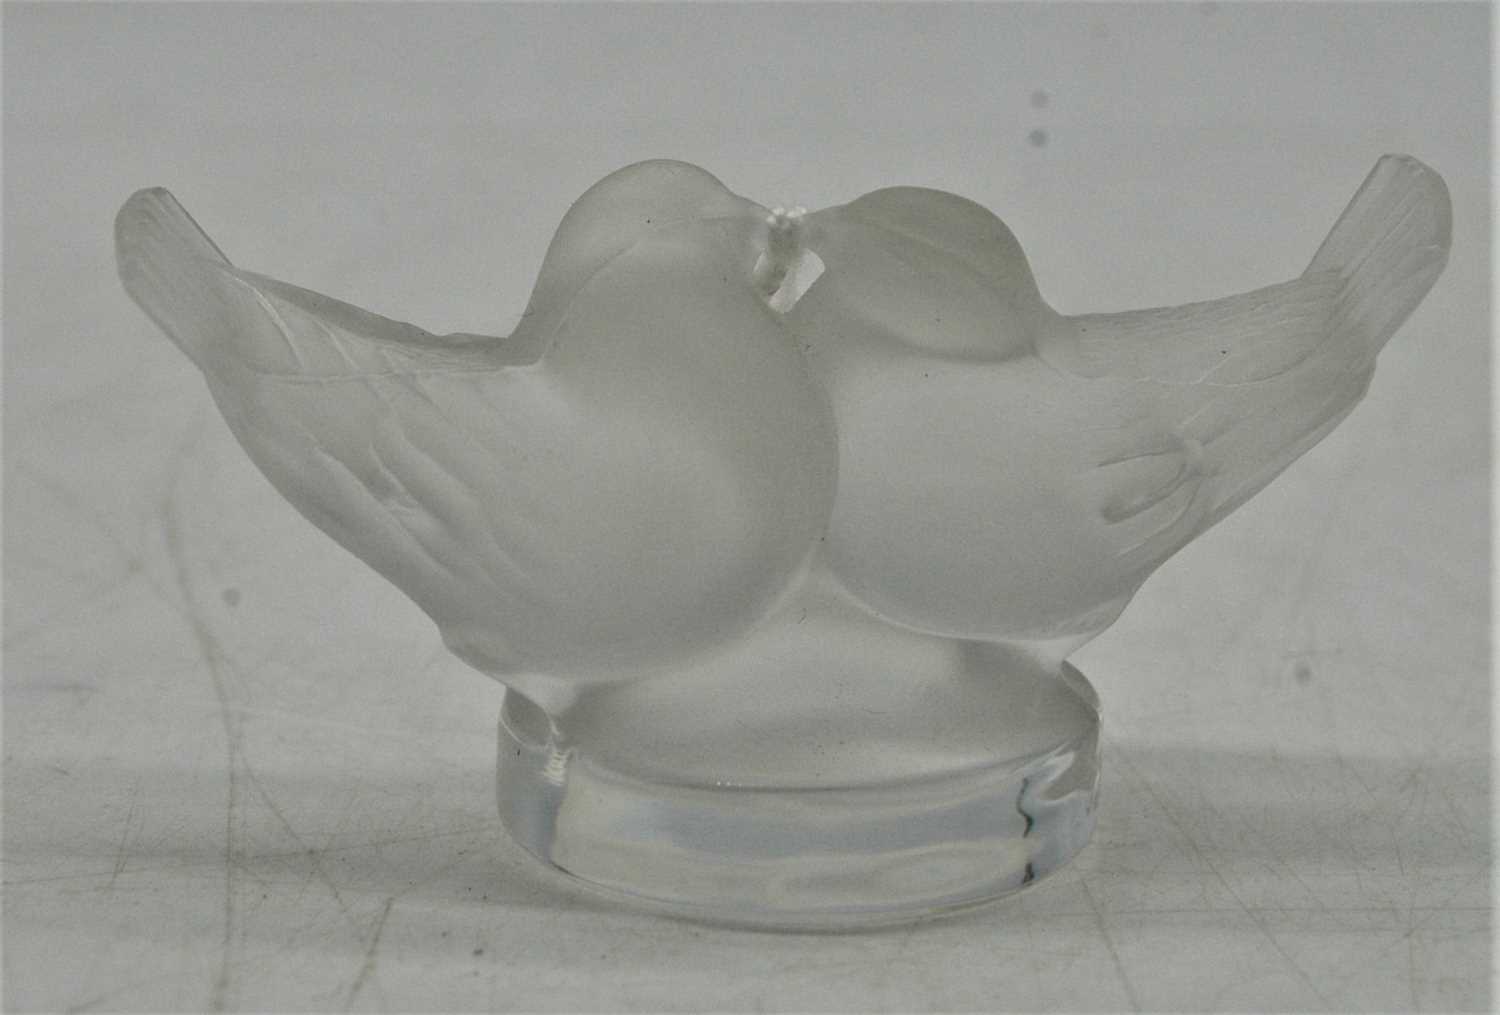 A small Lalique frosted glass table ornament, modelled as two lovebirds on a circular base, with